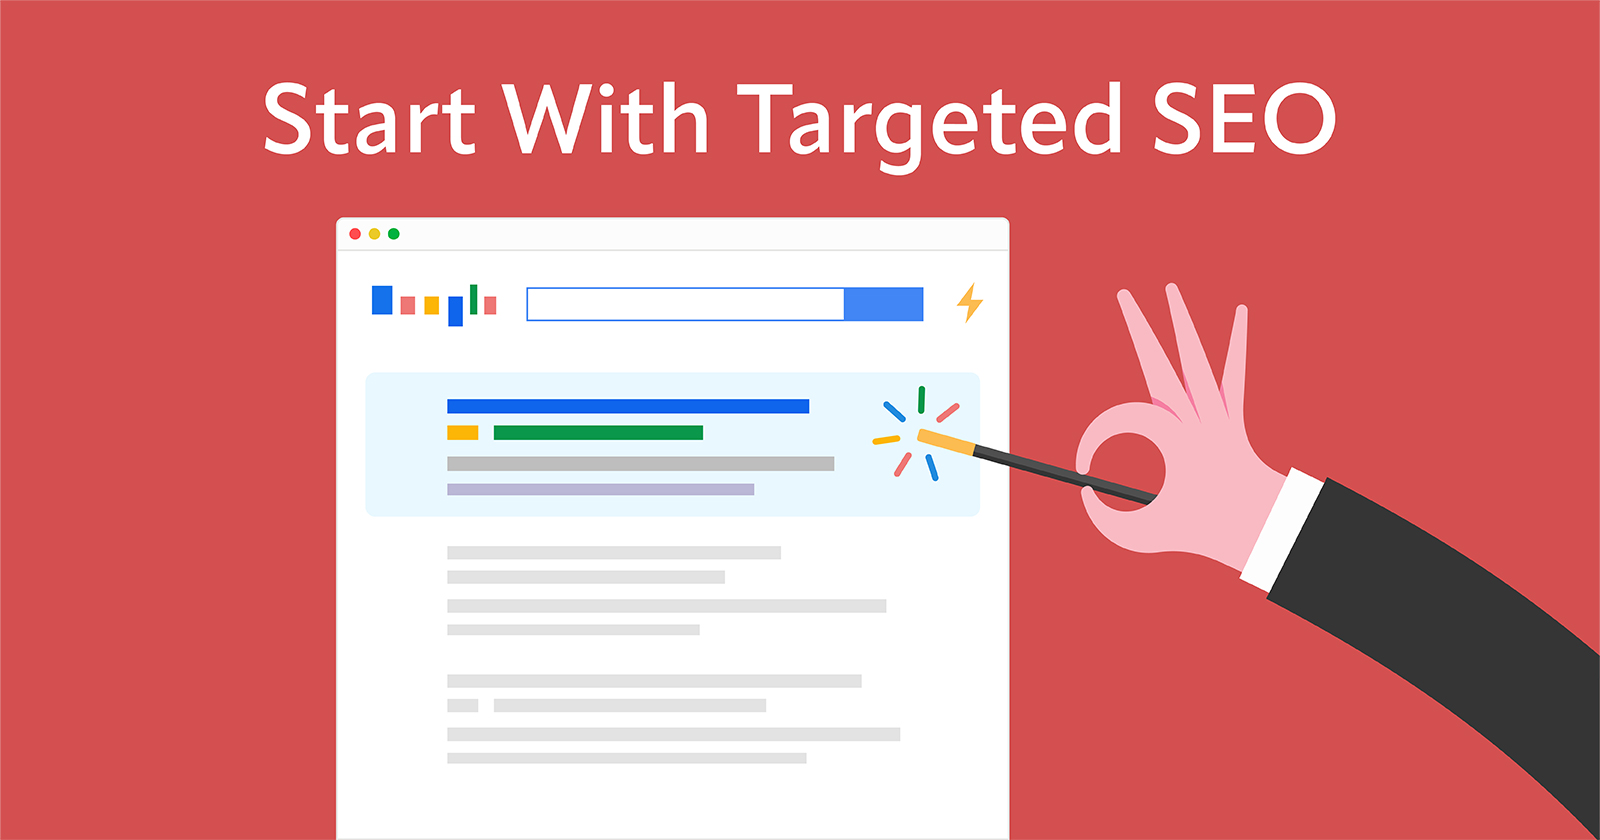 8 Powerful Steps To Outrank Your Competition With Targeted SEO